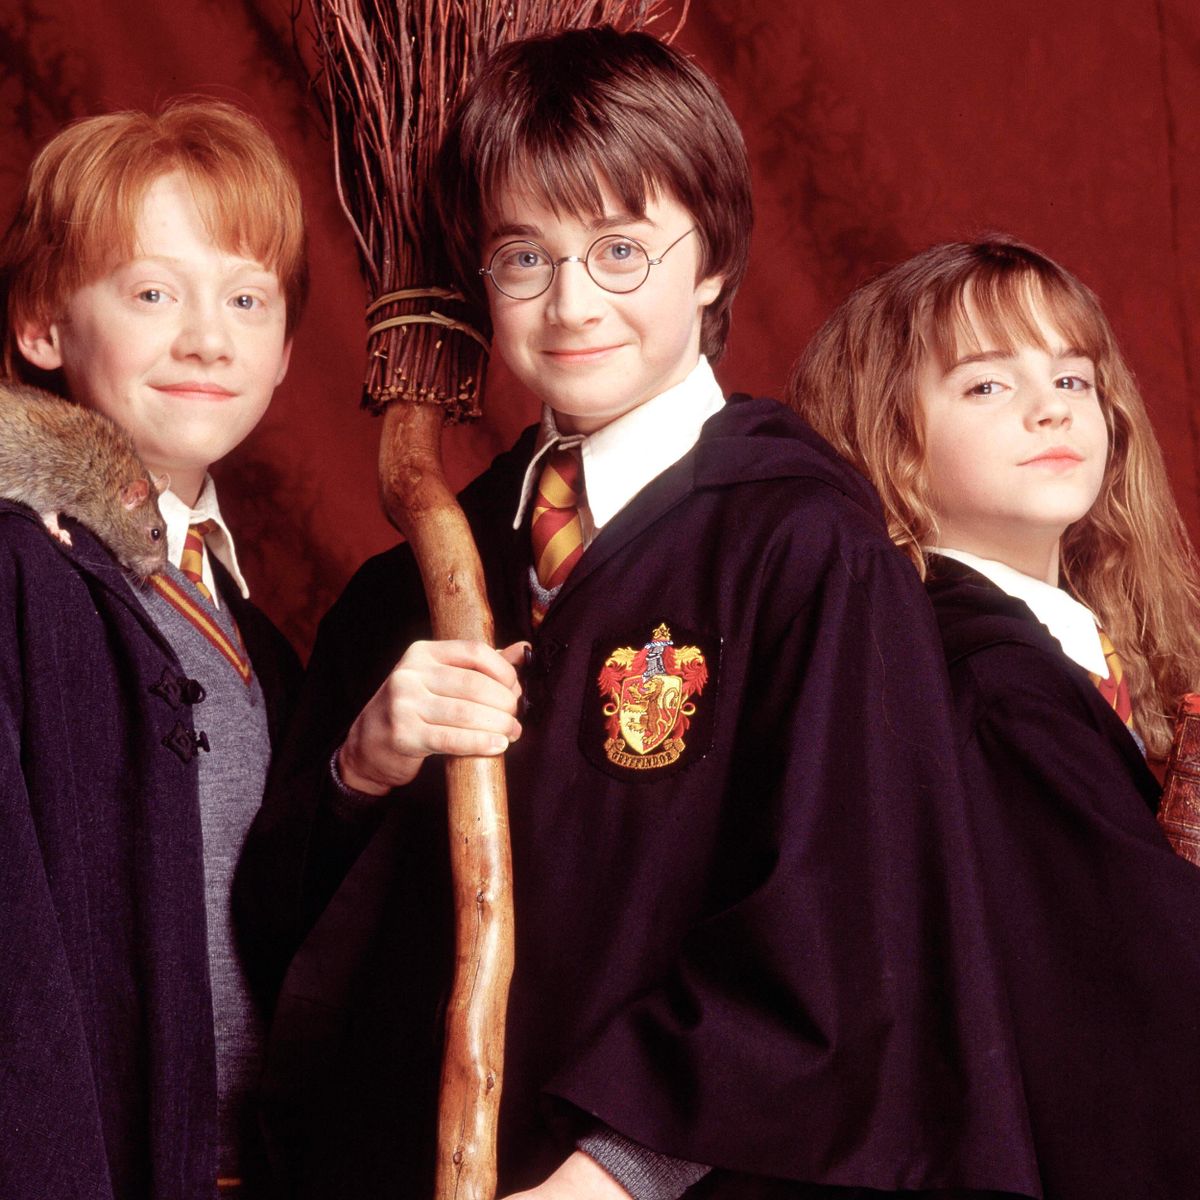 image of Ron Weasley, Harry Potter, and Hermione Granger